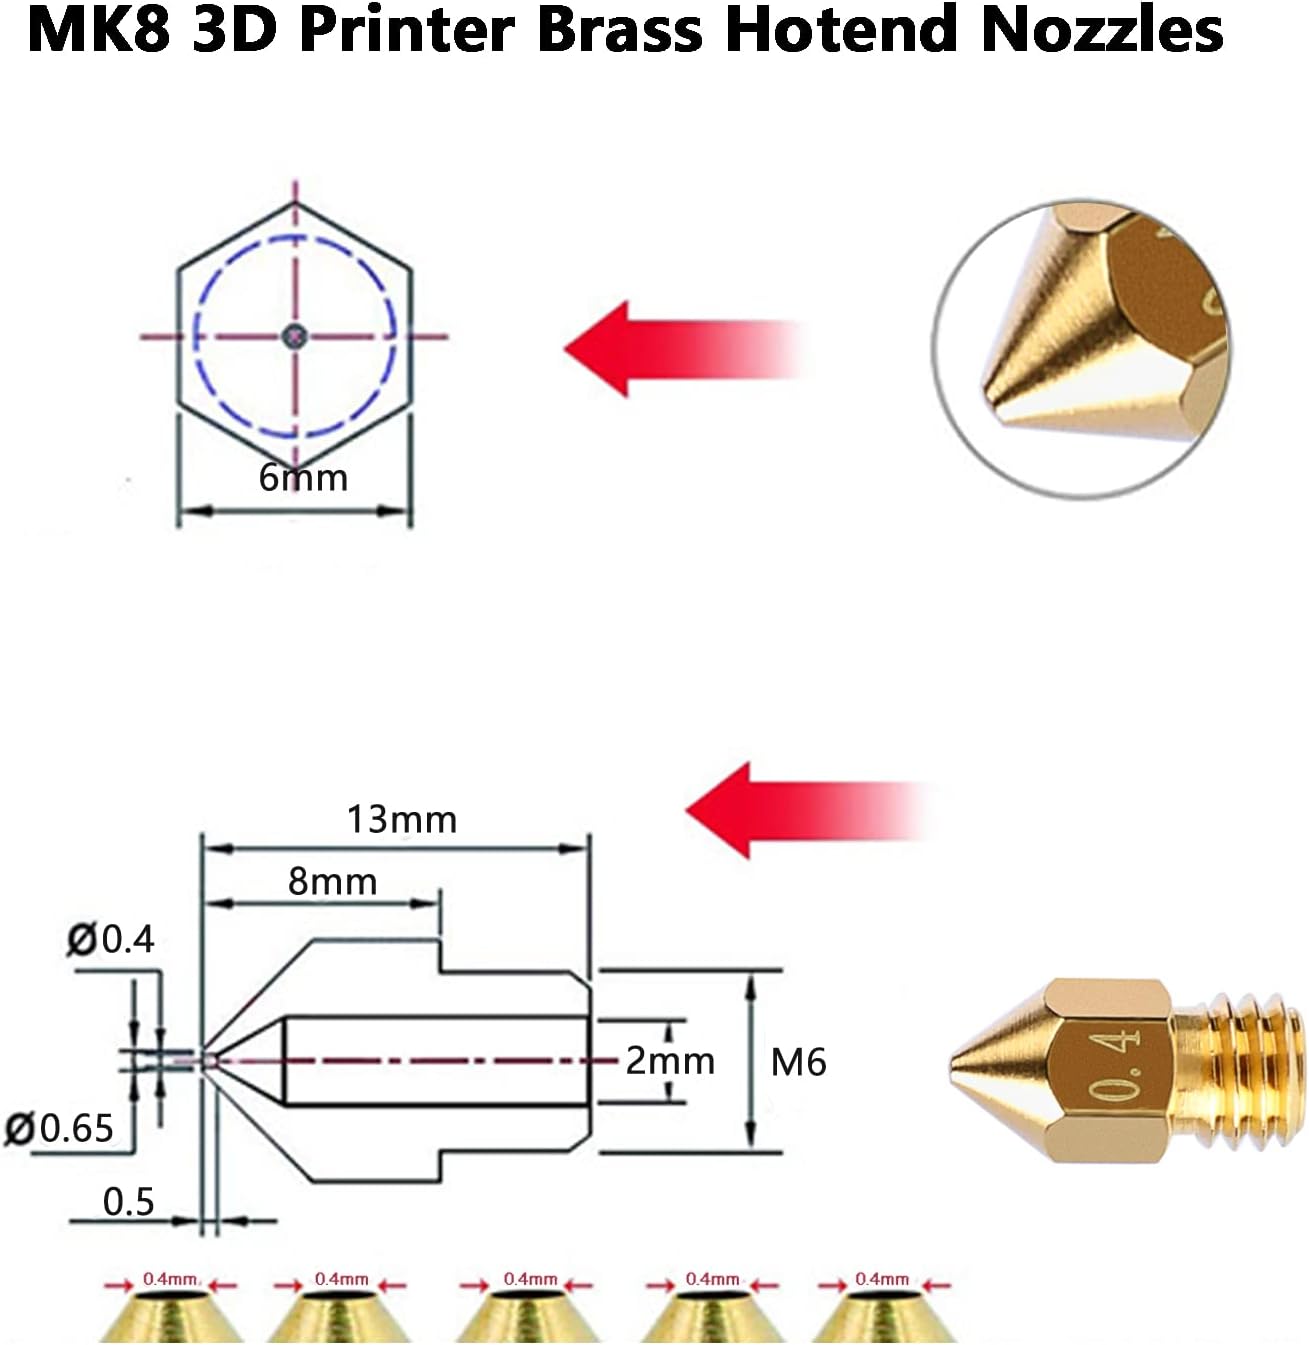 comgrow-25pcs-mk8-ender-3-v2-nozzles-04mm-3d-printer-brass-hotend-nozzles-with-diy-tools-storage-box-for-creality-ender-1-1 Comgrow Nozzles 0.4MM Review